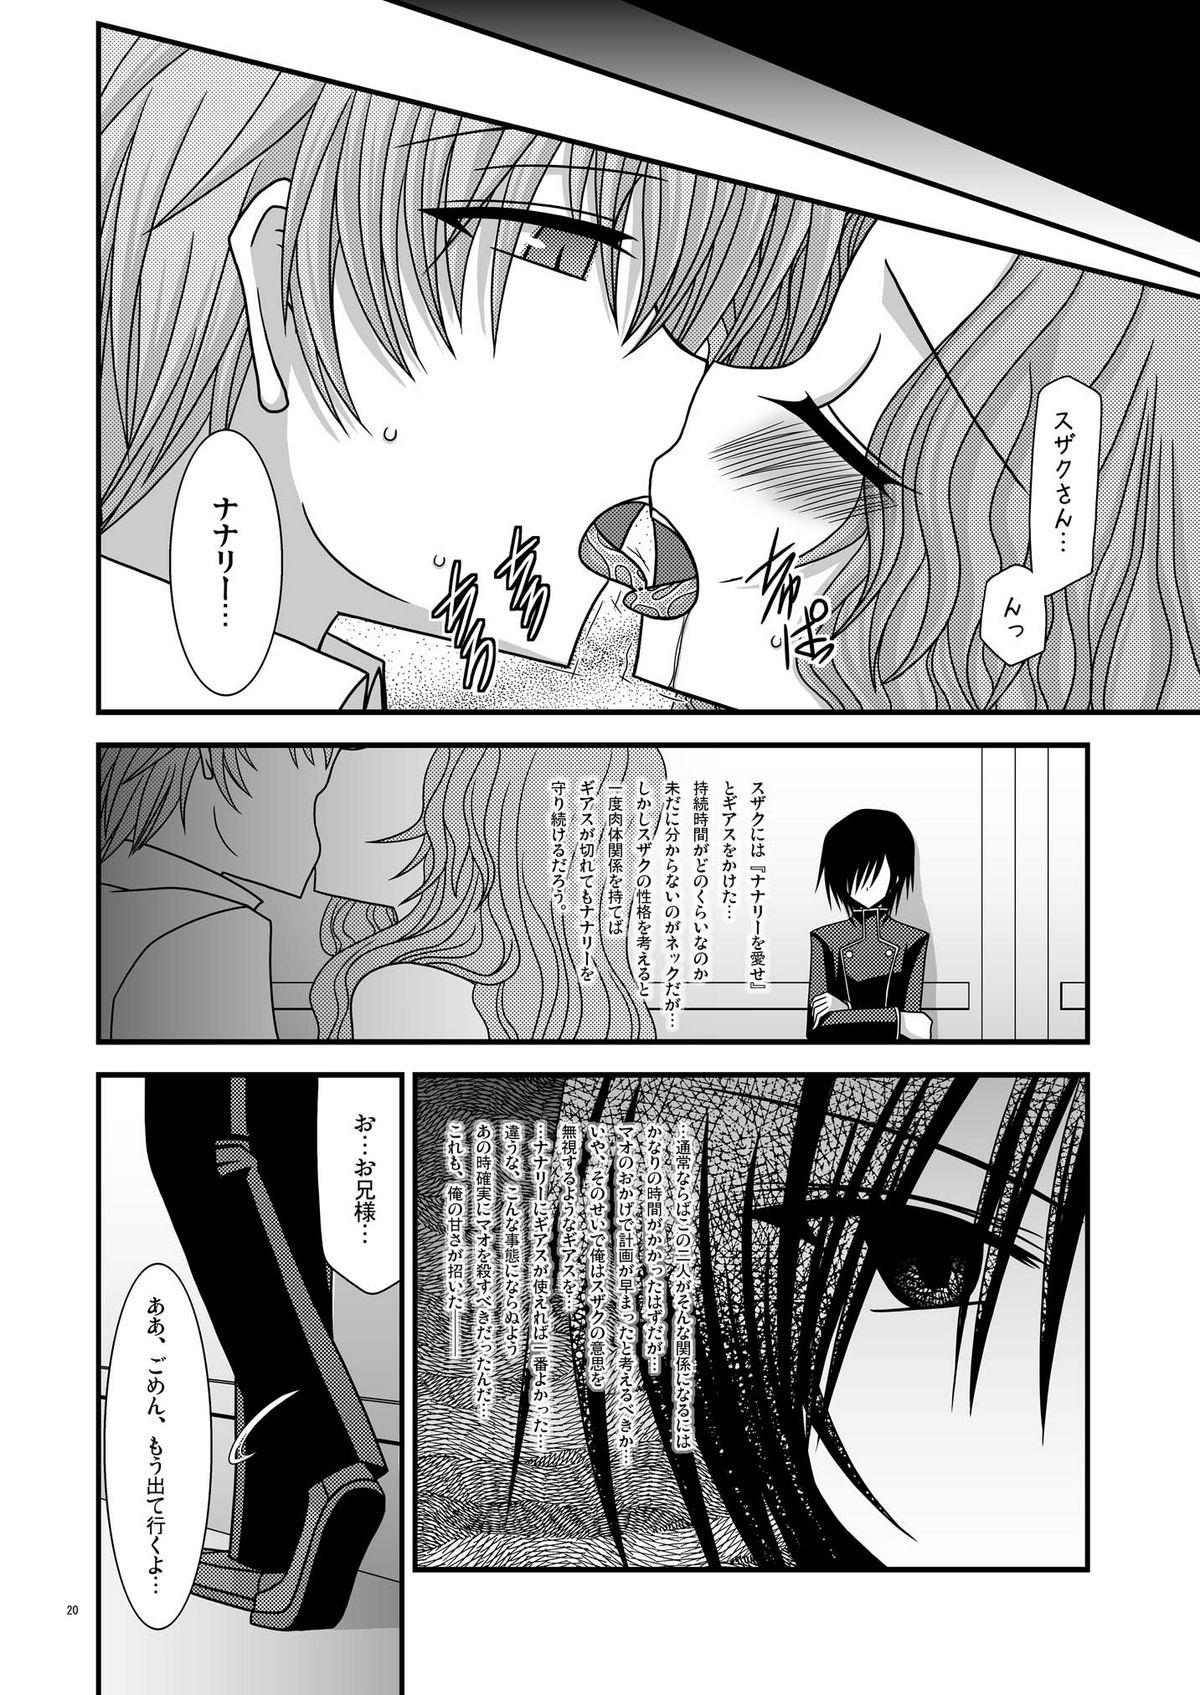 Tight Cunt Albtraum - Code geass Unshaved - Page 2